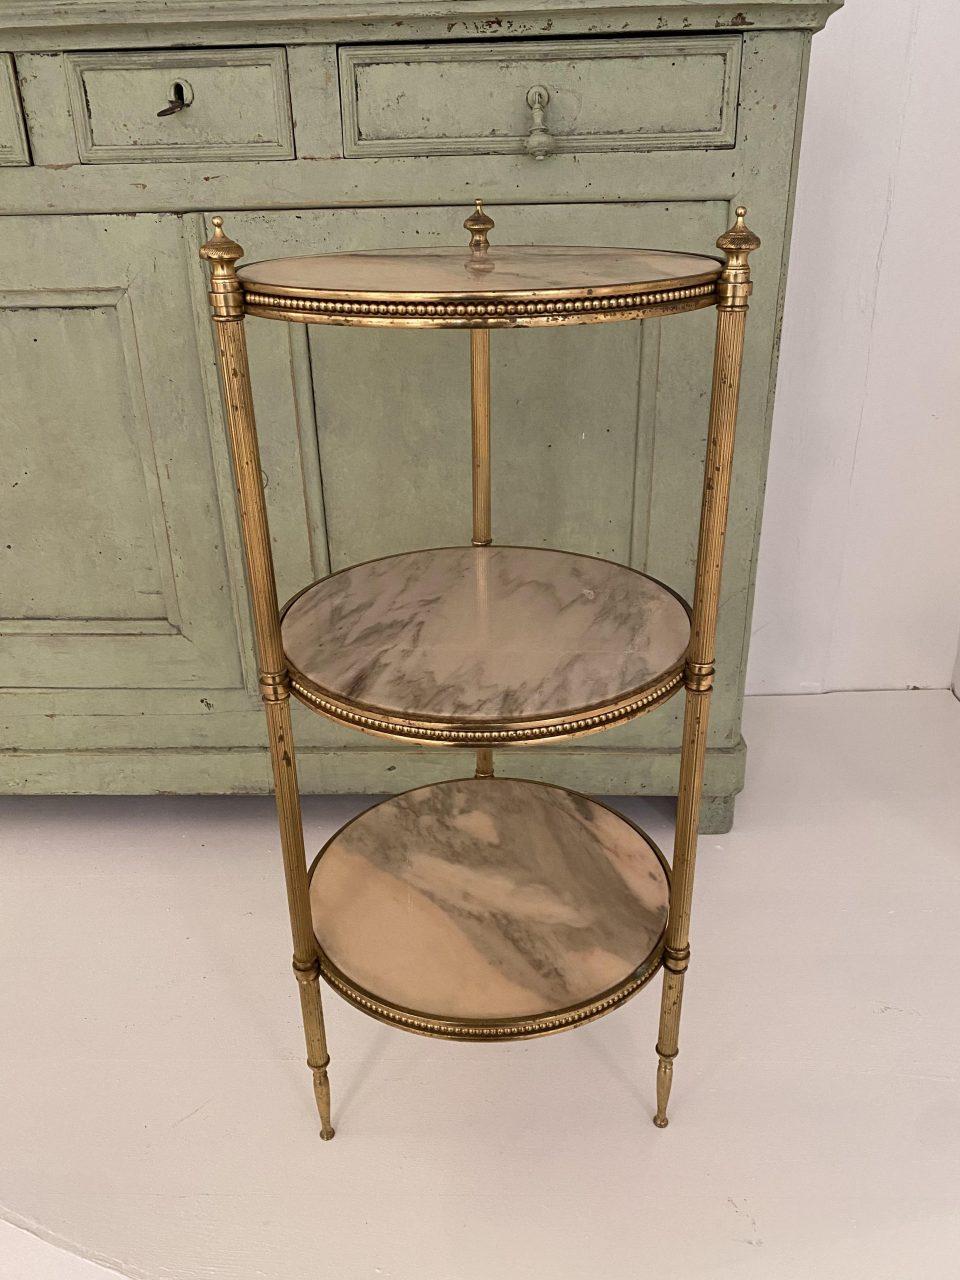 Beautiful and tall side table / étagère, with three round marble shelves, from circa 1940s-50s France. Elegantly made with a sophisticated sleek brass frame with fluted grooved legs and spiers, and with fine beading along the edge of each shelf.